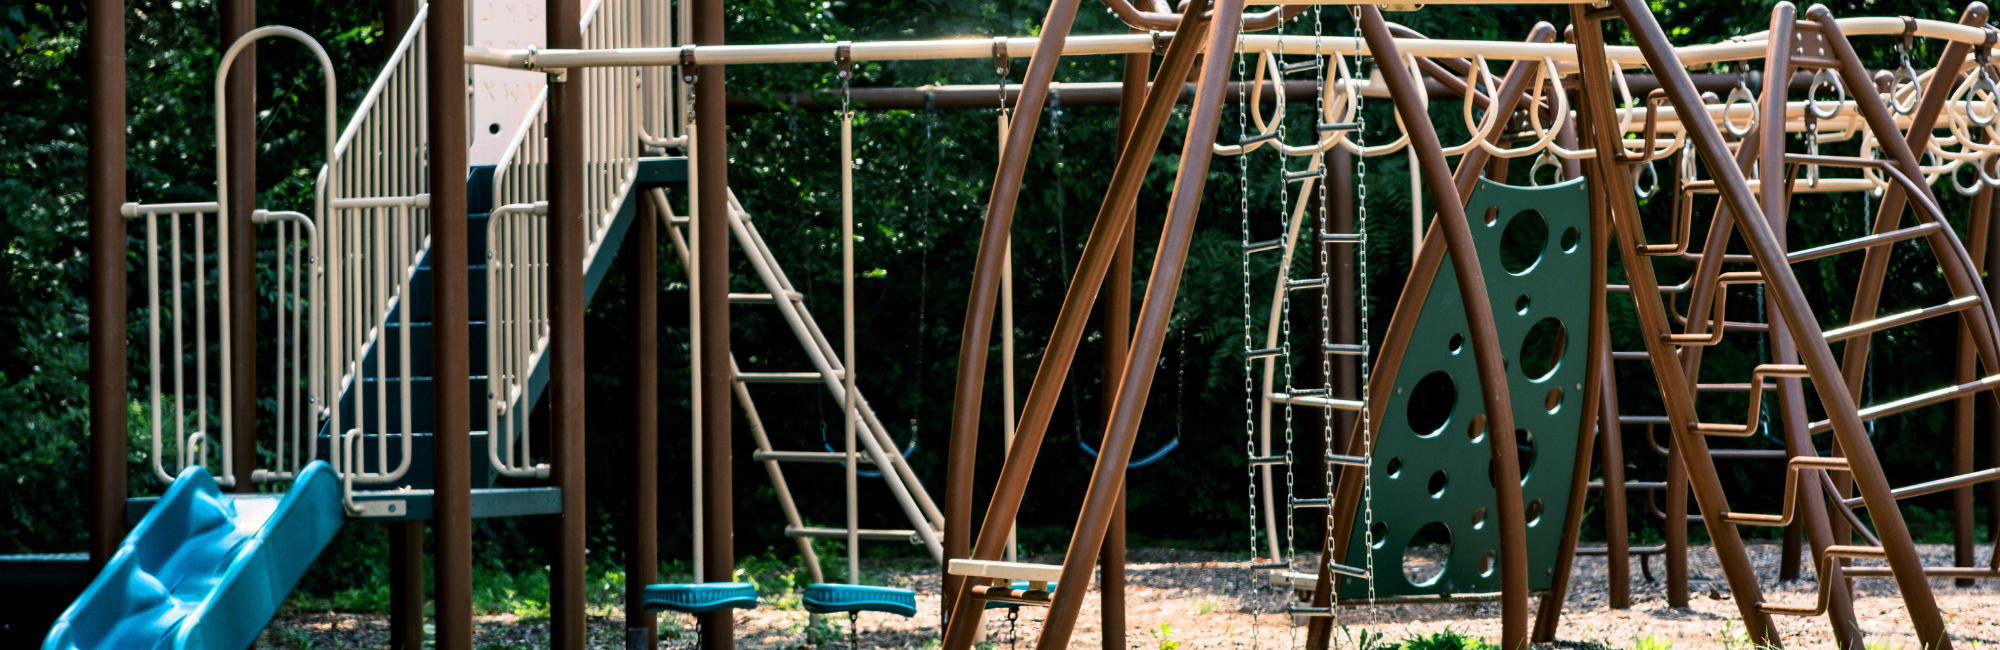 Close up image of a brown playground in a park